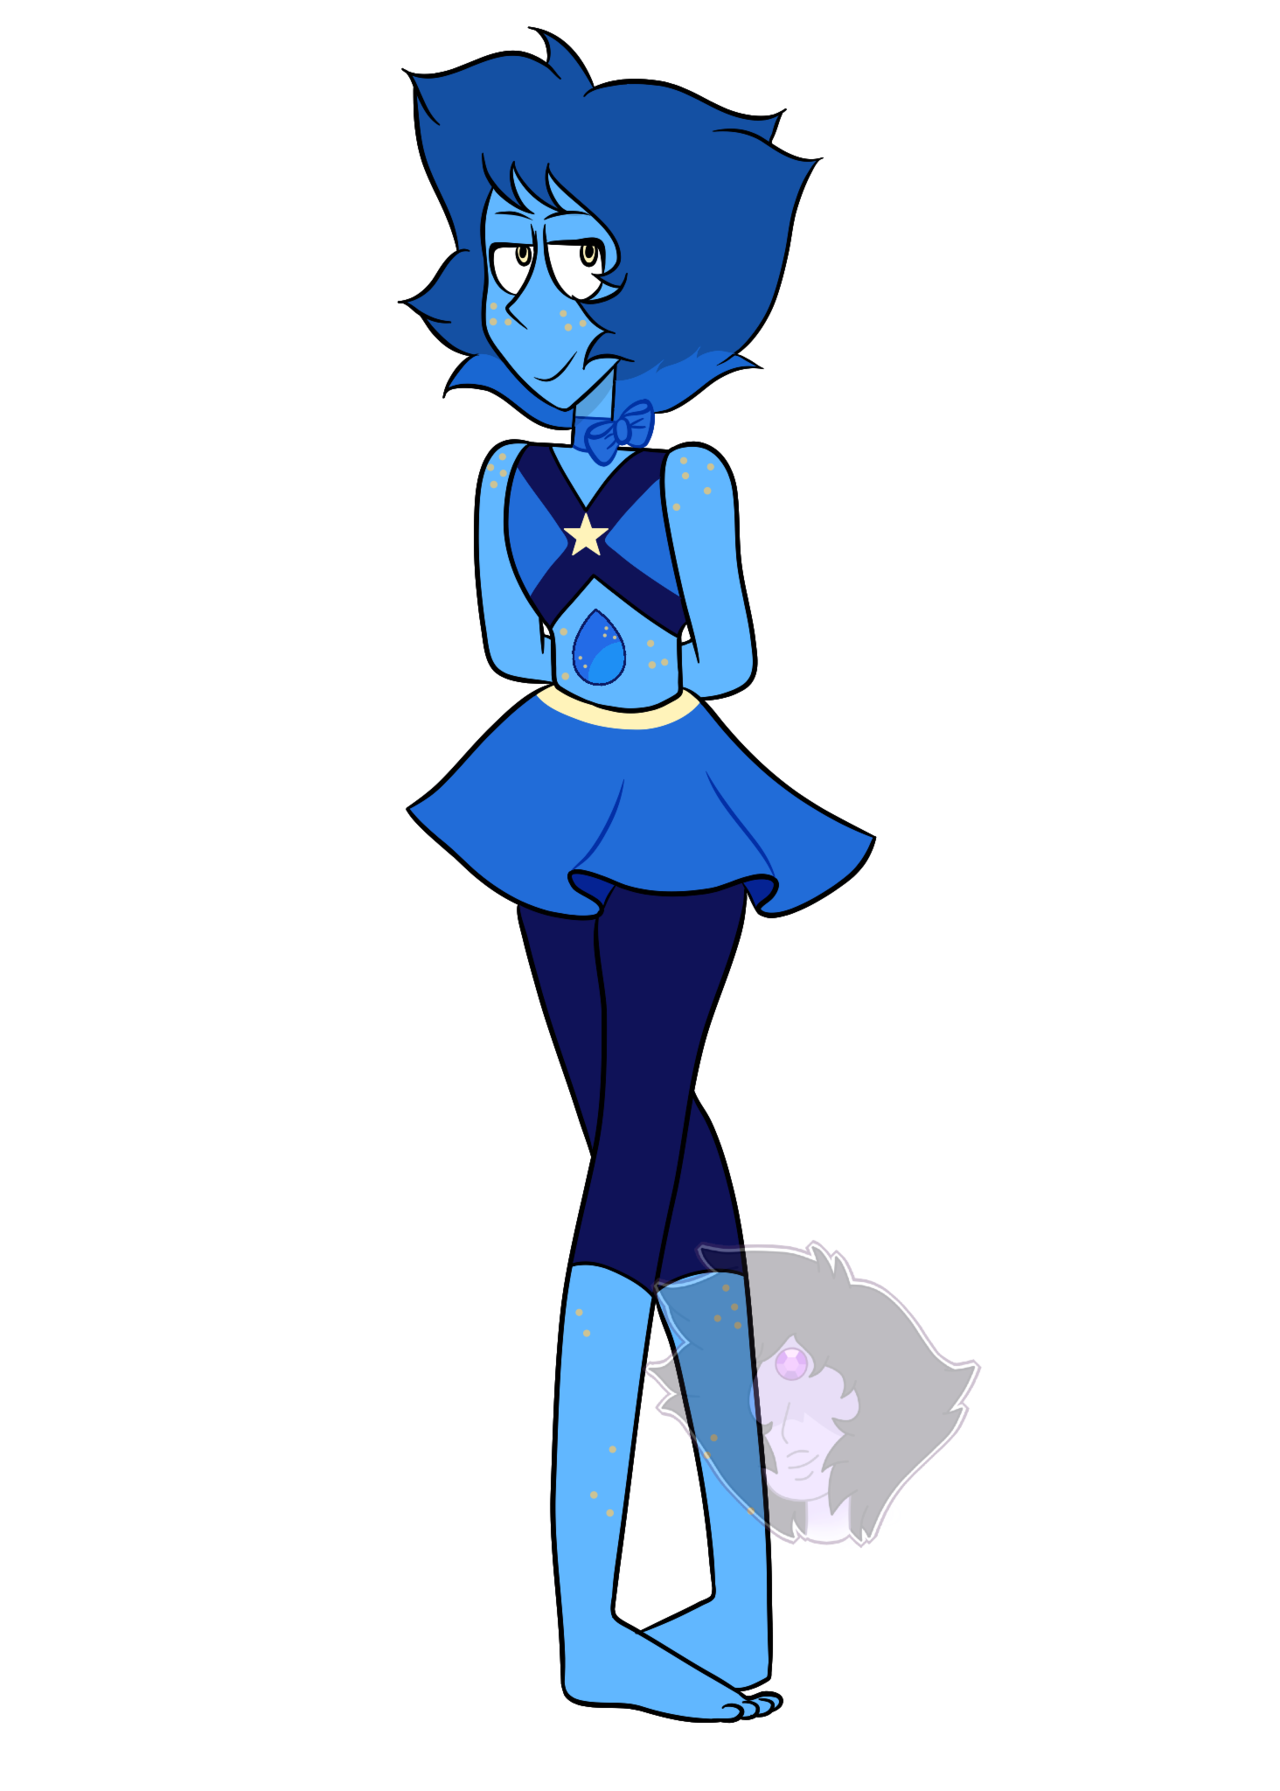 Introducing Gold Speckled Lapis (aka Specks) She was Amethyst’s former love. They had a very close bond and would meet countless times in private during Blue Diamond’s courtroom balls (I imagine that...